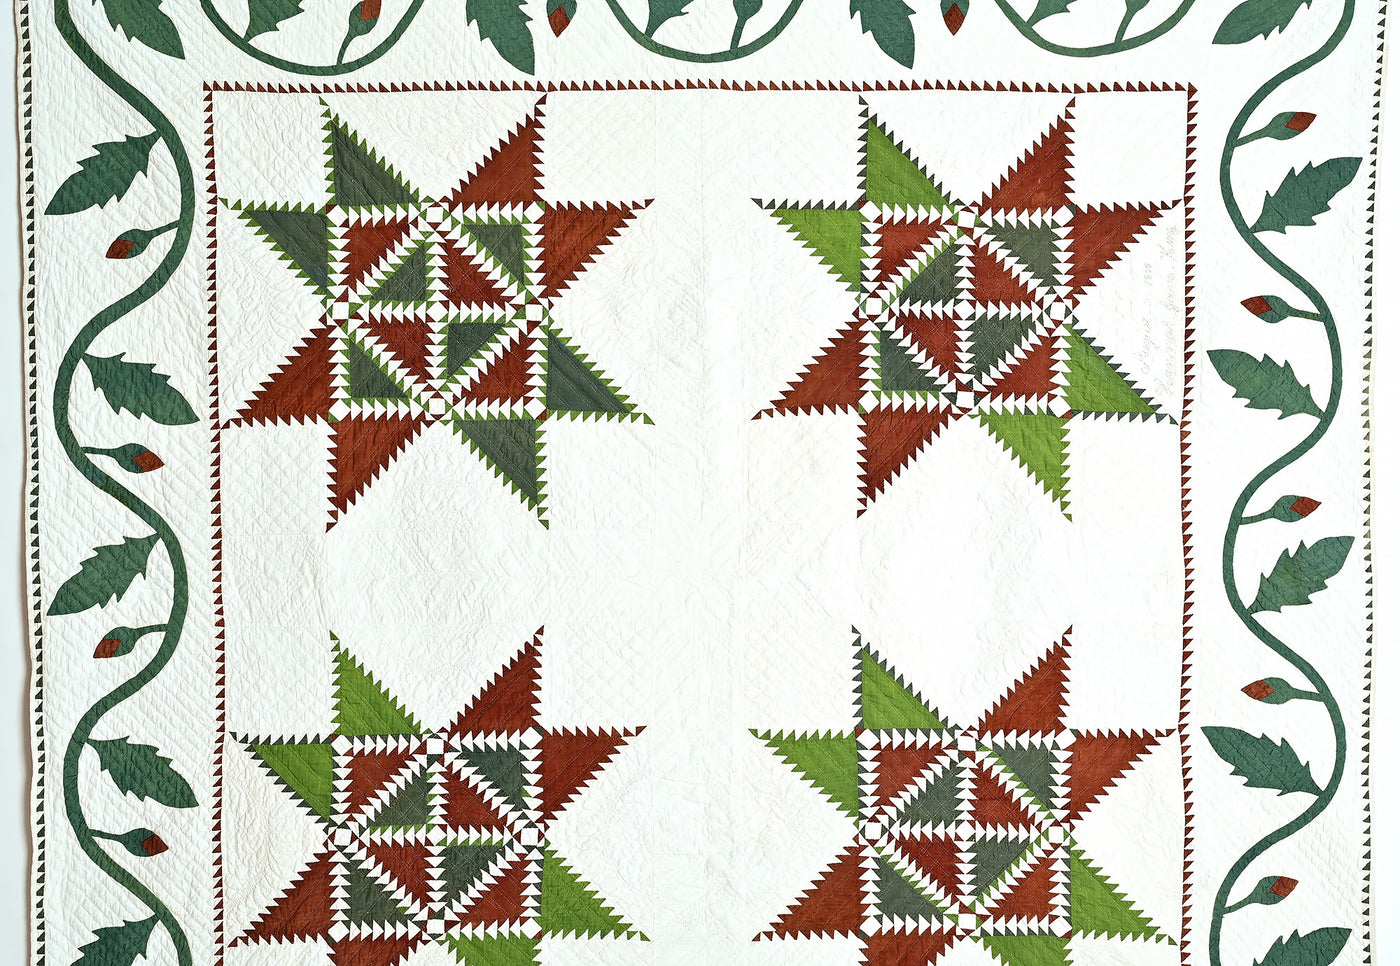 Star Spangled Banner Quilt: Signed and Dated 1878